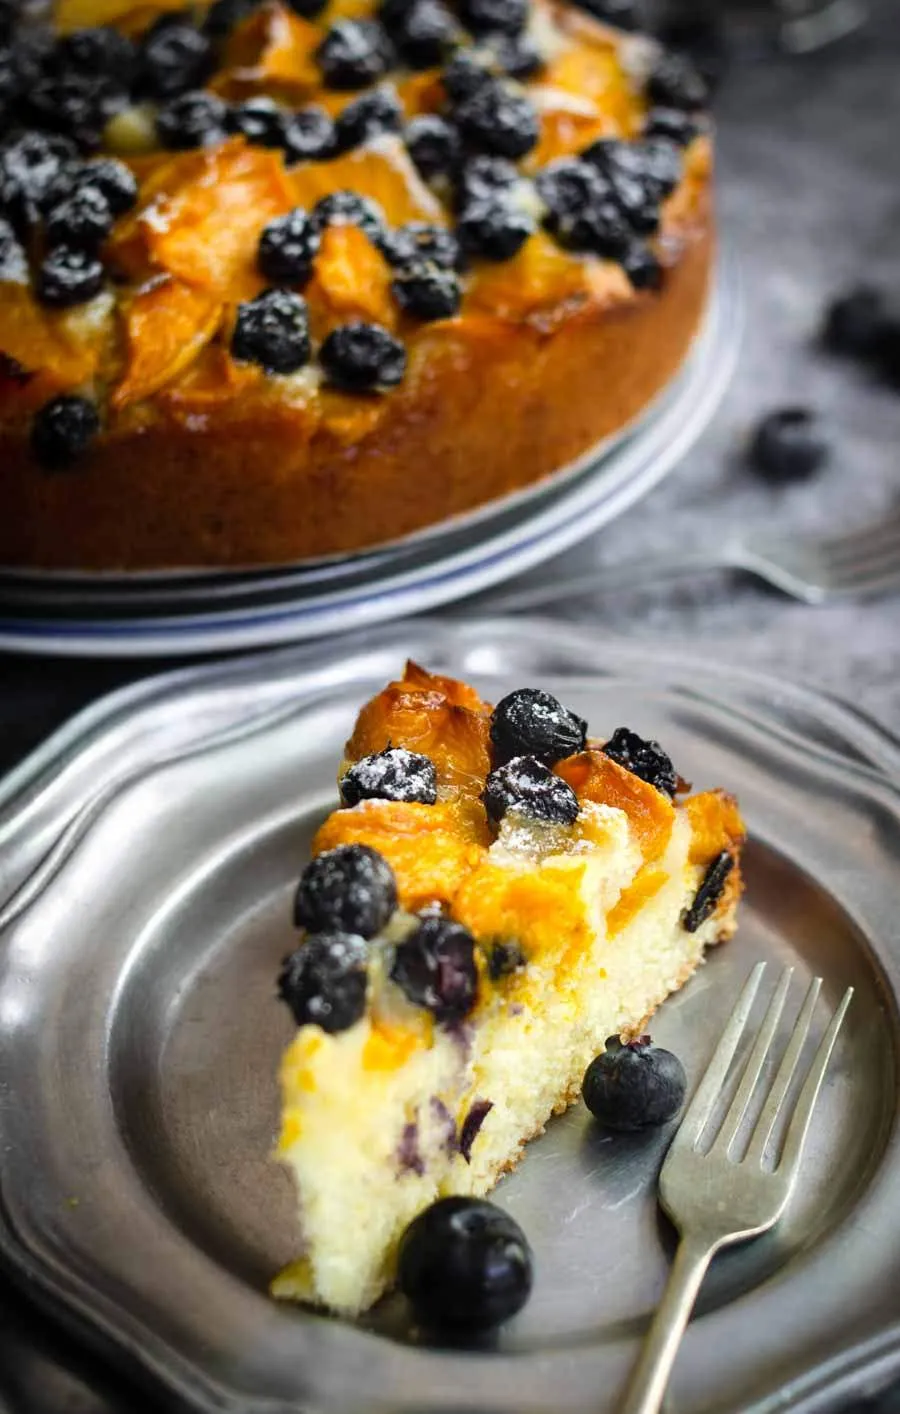 delicious Blueberries and mango pastry cake